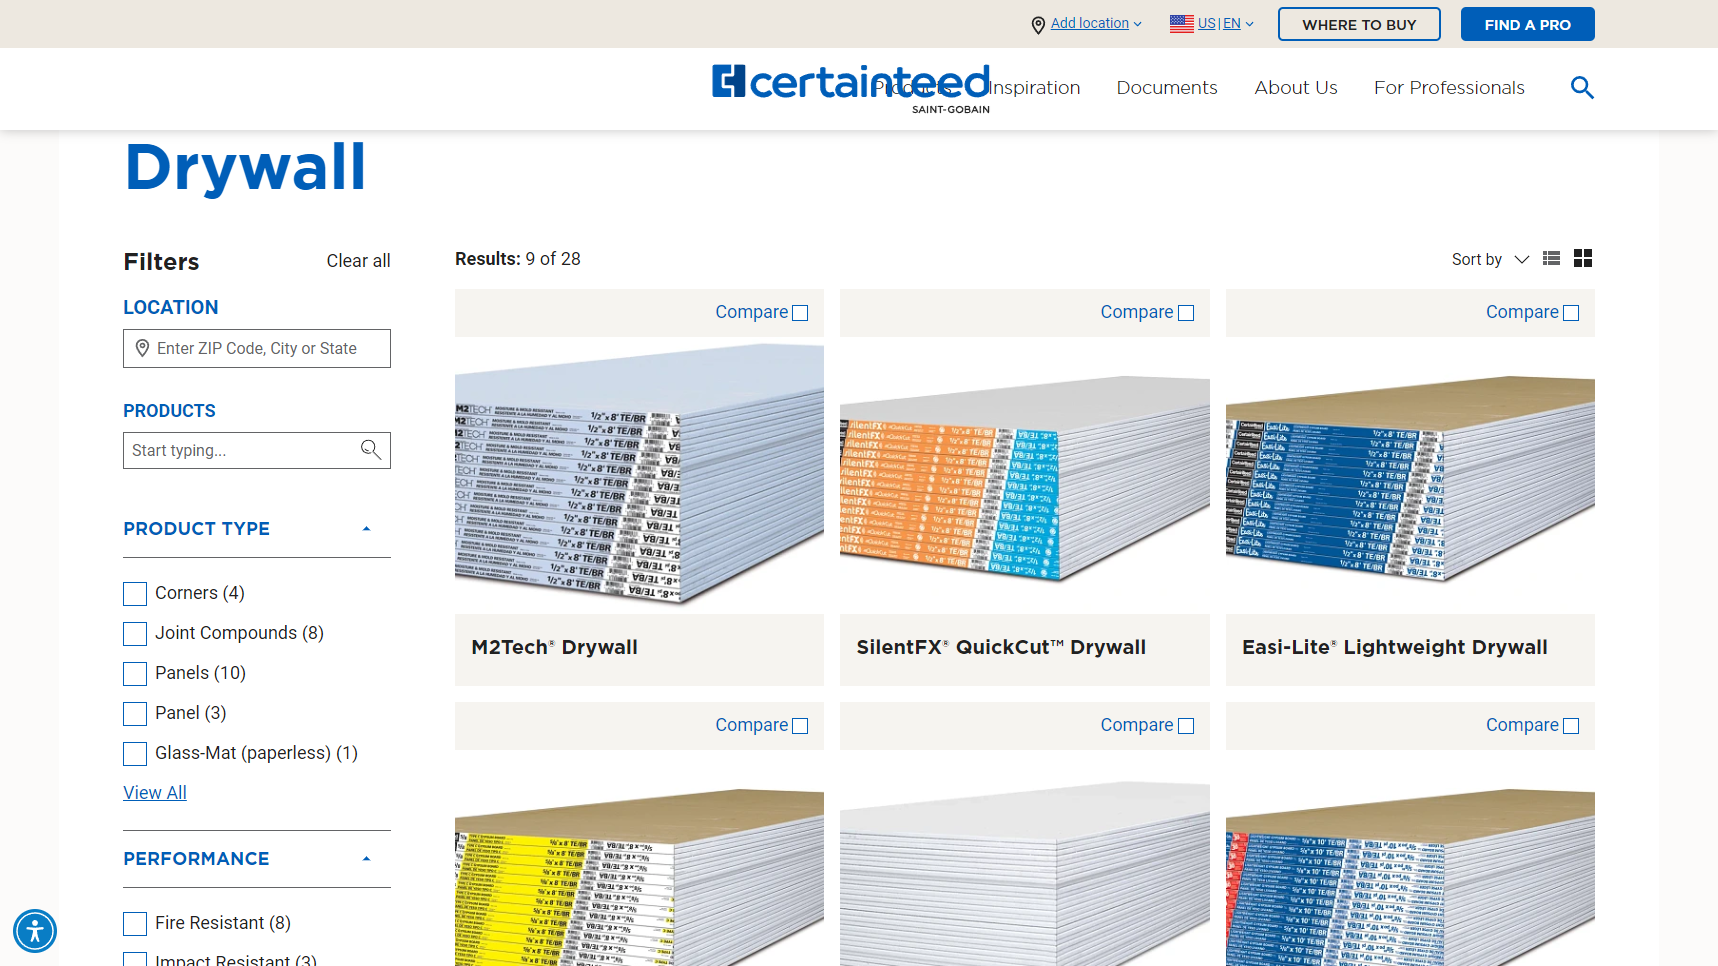 CertainTeed - Drywall Manufacturer